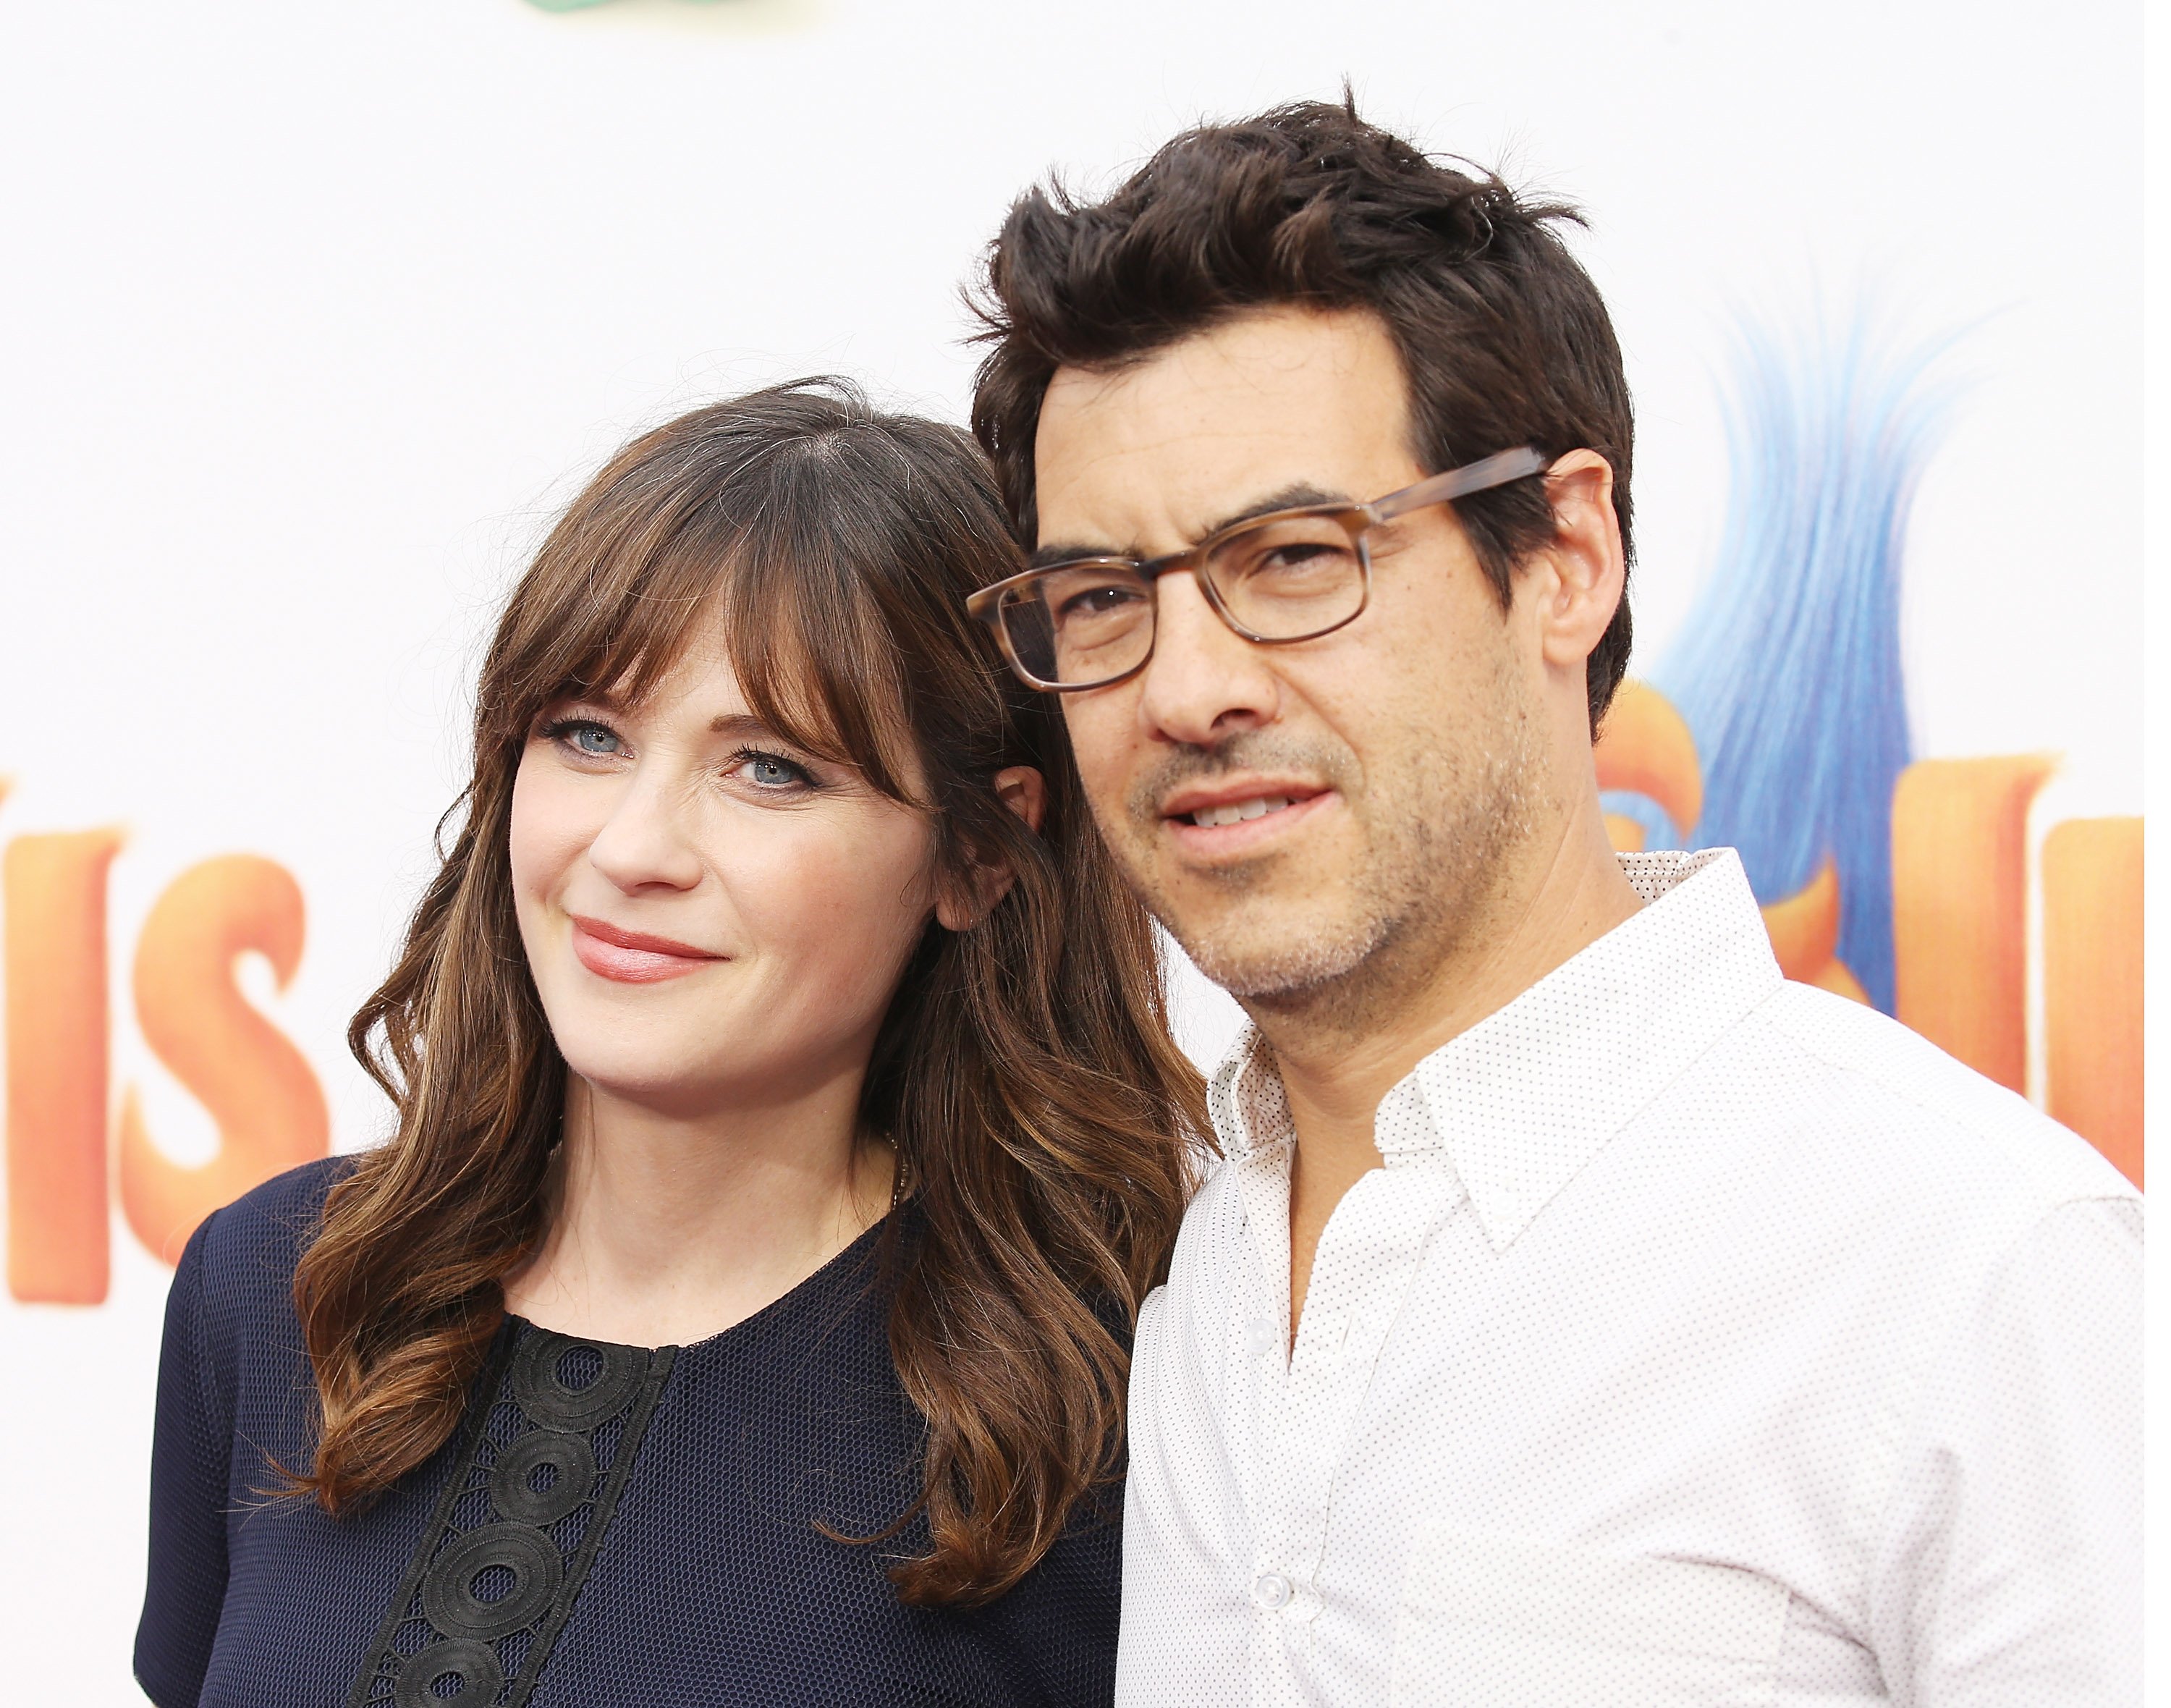 Zooey Deschanel and her then-husband, film producer Jacob Pechenik arriving at the Los Angeles premiere of 20th Century Fox's "Trolls" at Regency Village Theatre on October 23, 2016 in Westwood, California. / Source: Getty Images